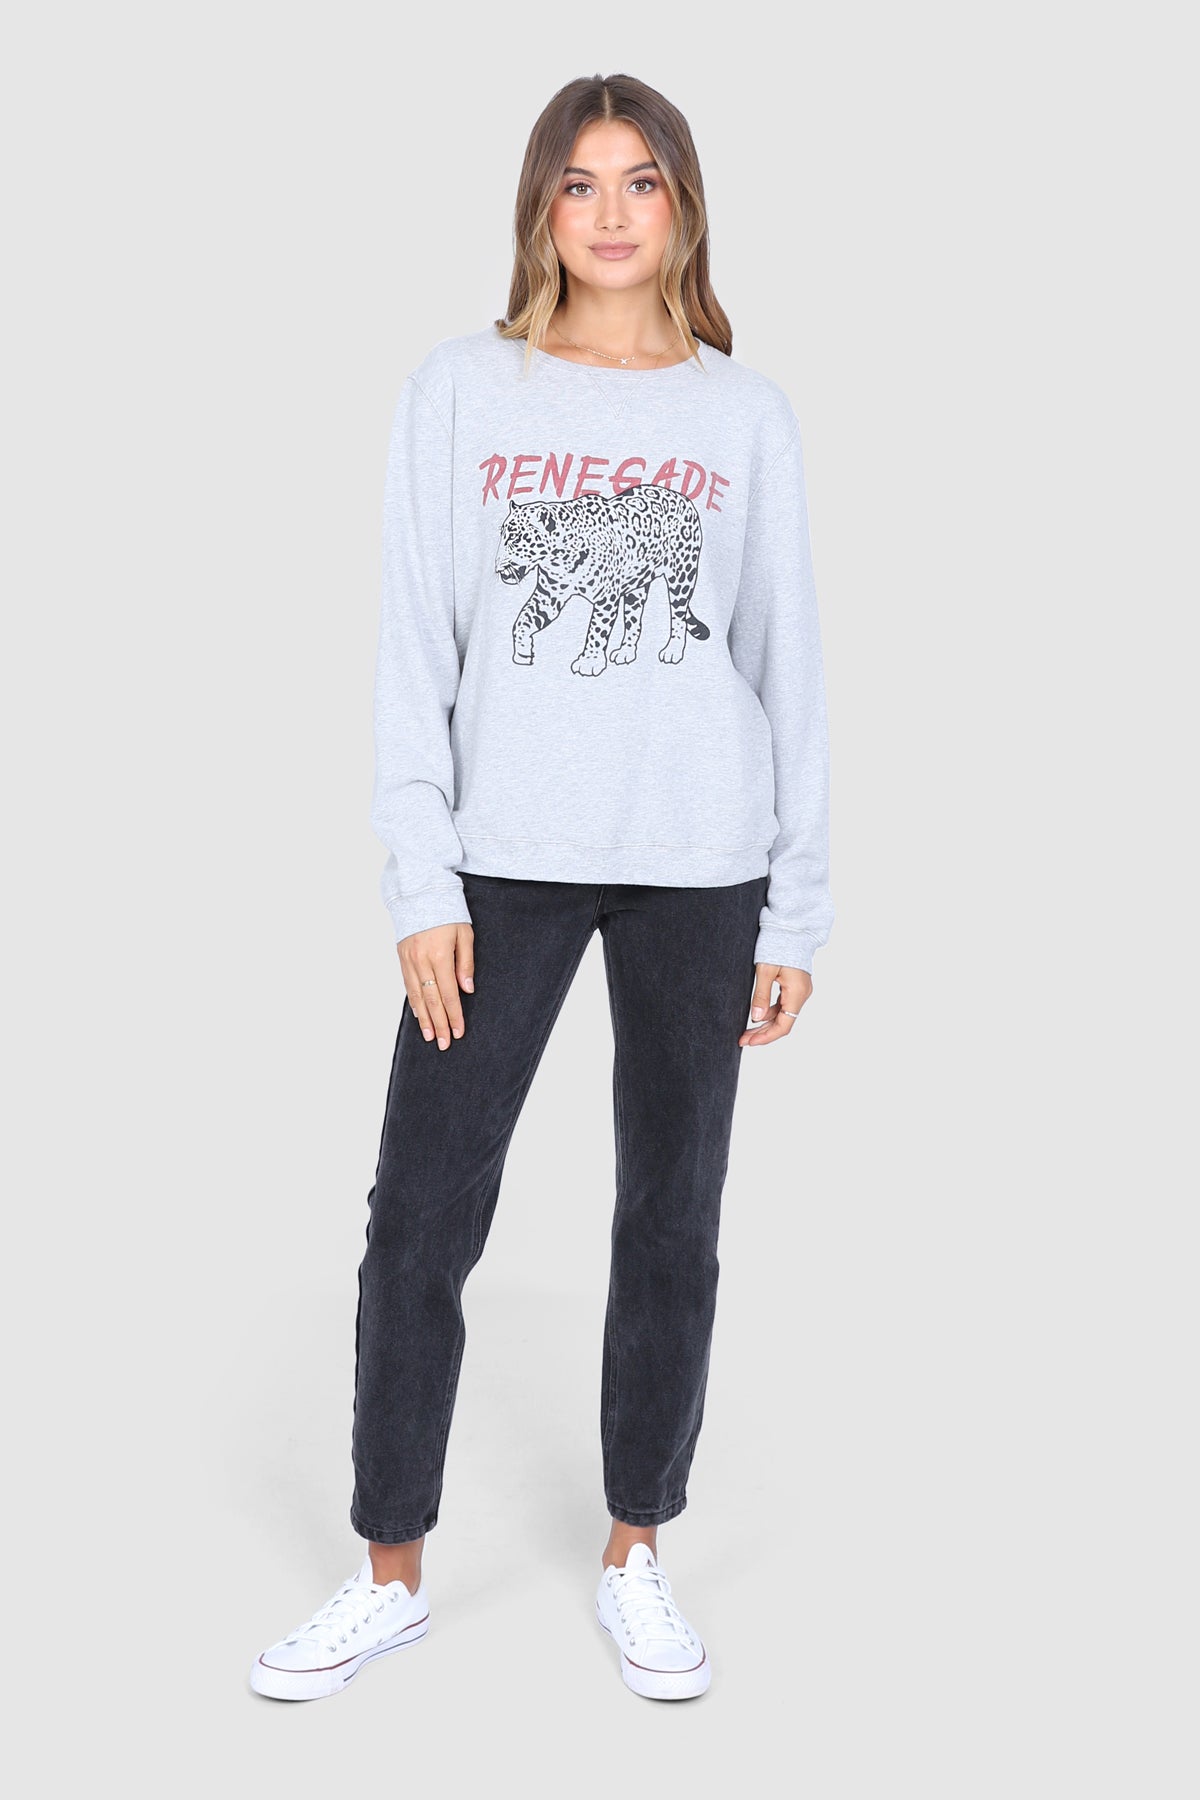 Bailage Haired Caucasian Female wearing a Relaxed Fit  Basic  Casual  Scoop Neck  Leopard Print  Crew neck Jumper  Graphic Designed Sweater  Cuffed Long Sleeves paired with high waisted black denim jeans and white converse